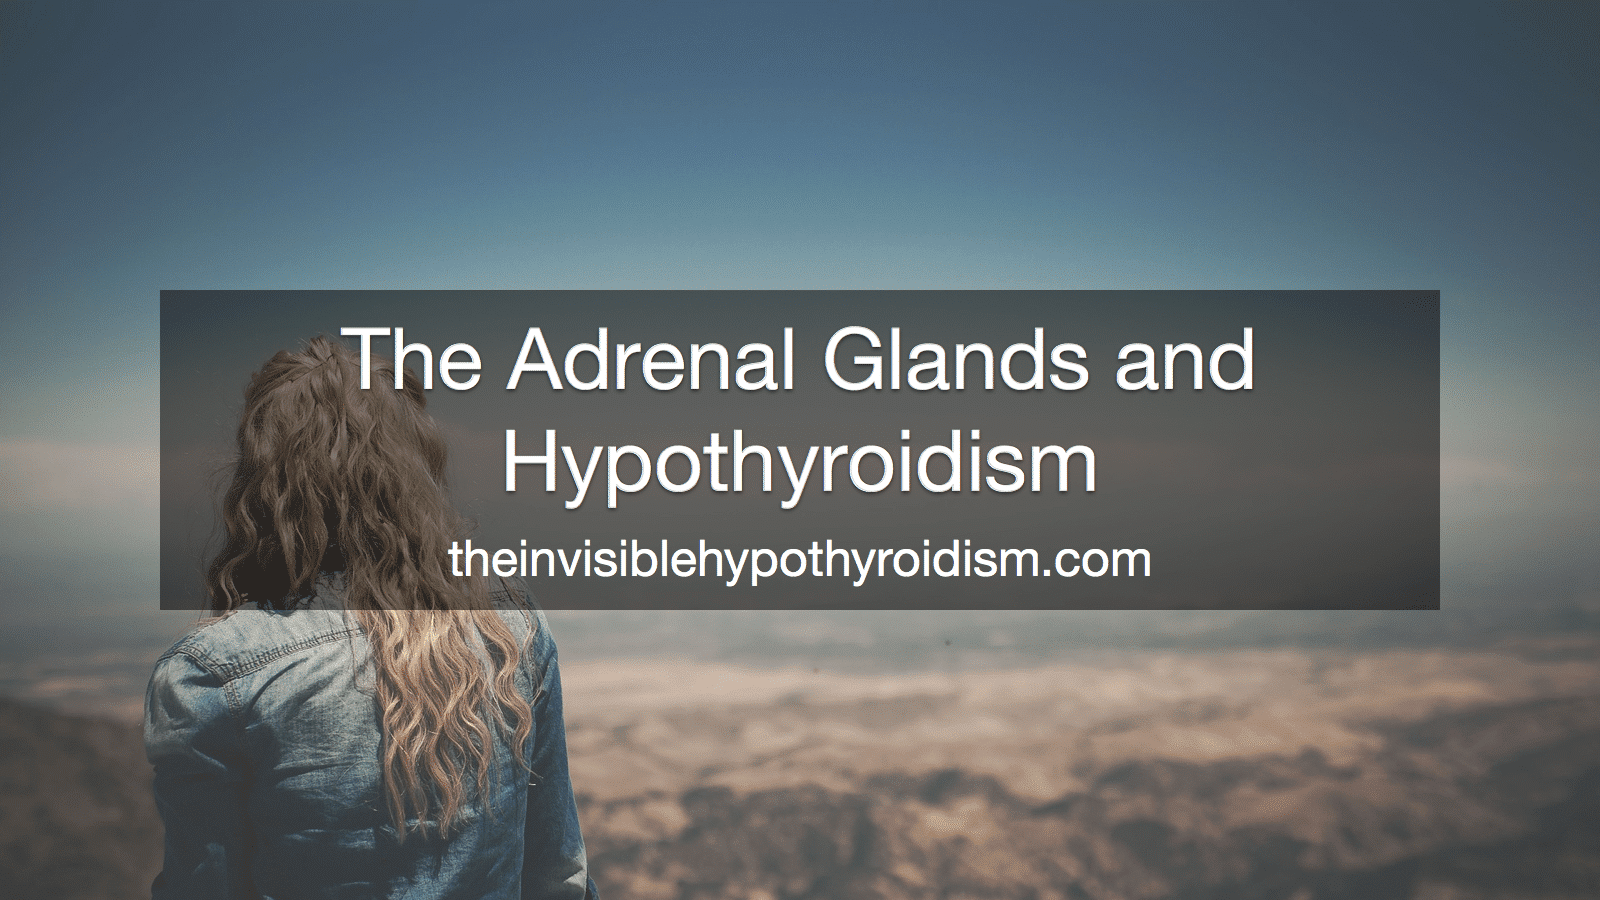 The Adrenal Glands and Hypothyroidism